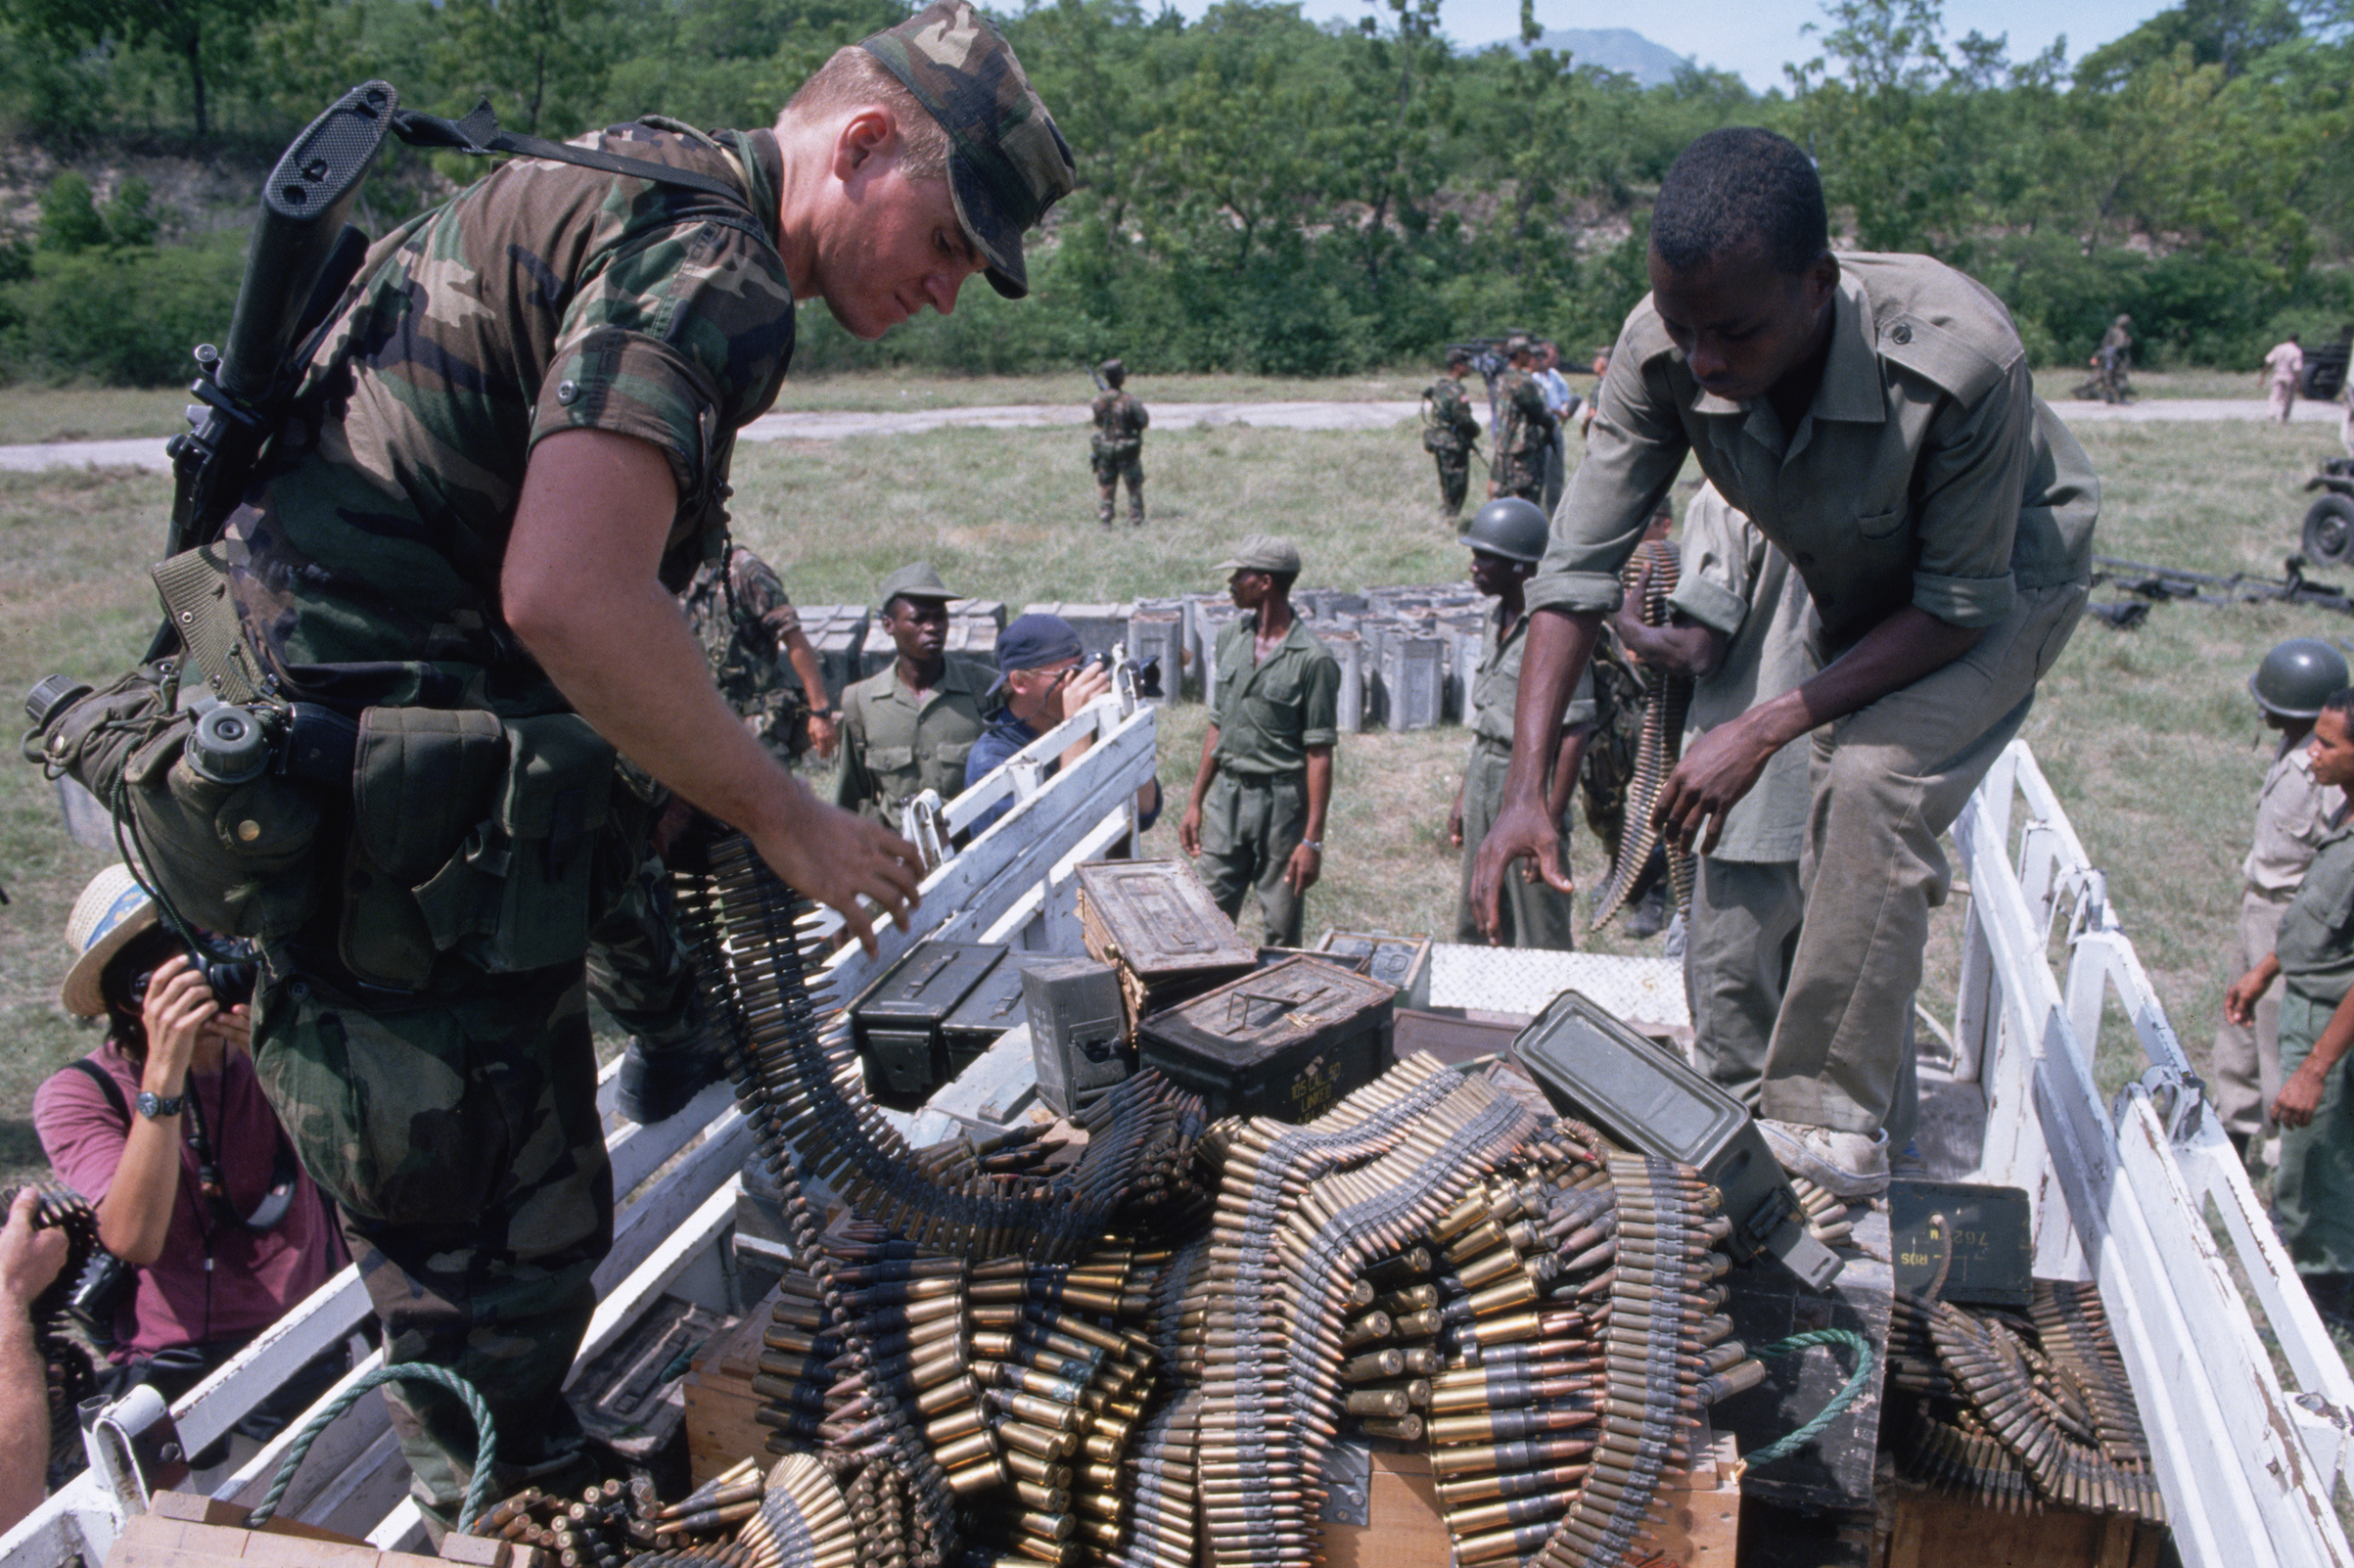 An American and Haitian soldier unload ammunition together from a supply truck in 1994. (Peter Turnley—Corbis/VCG via Getty Images)